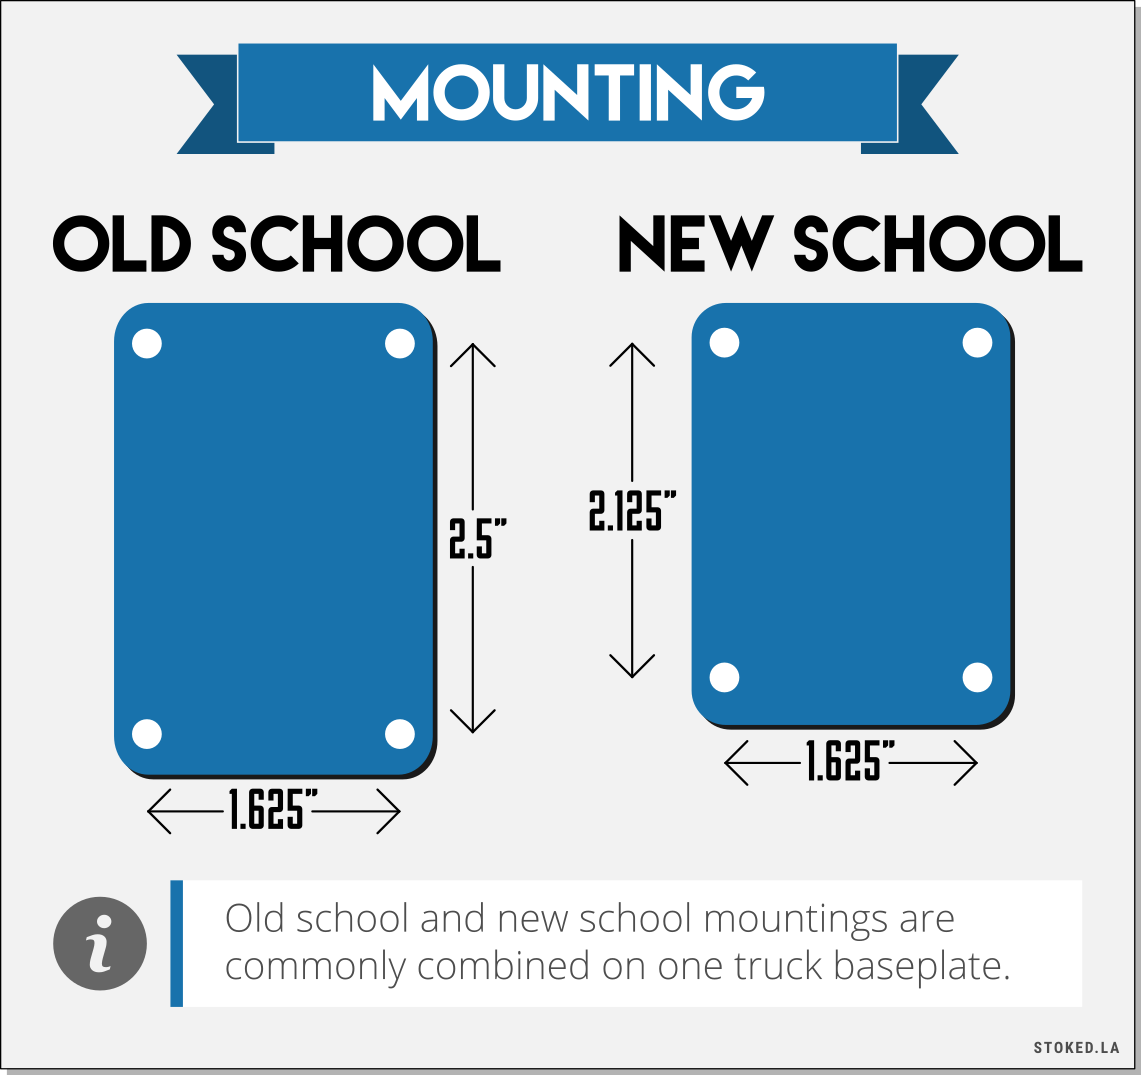 Mounting Patterns in Trucks Infographic